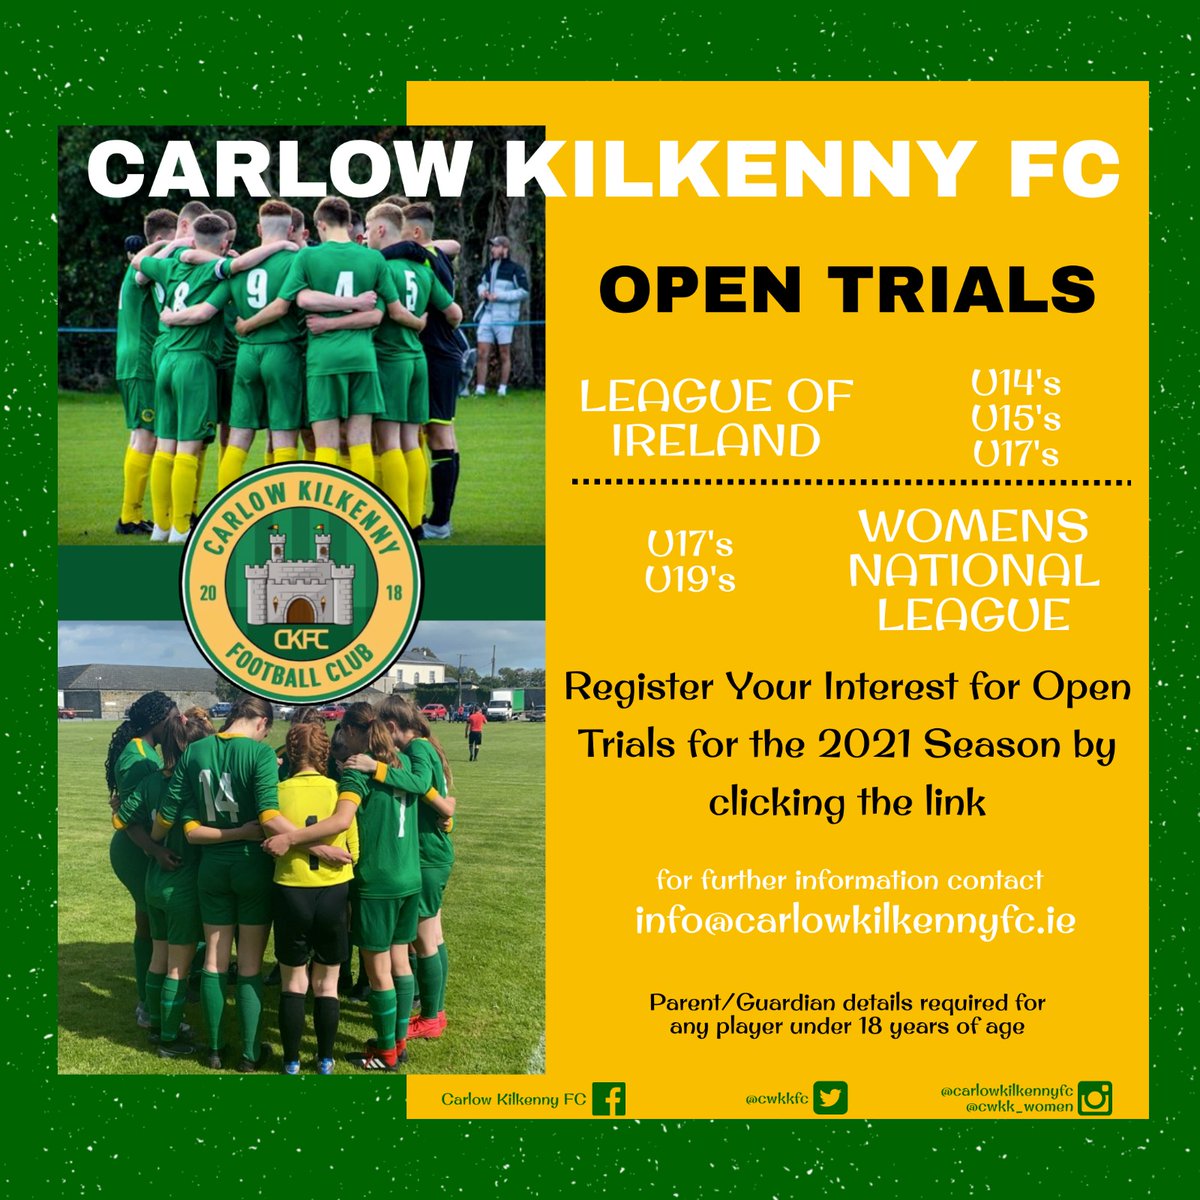 Carlow Kilkenny F C Carlow Kilkenny Fc Are Delighted To Announce That We Have Added U19s Wnl And U14 Boys League Of Ireland Squads Will Compliment Our U17s Wnl And U15s